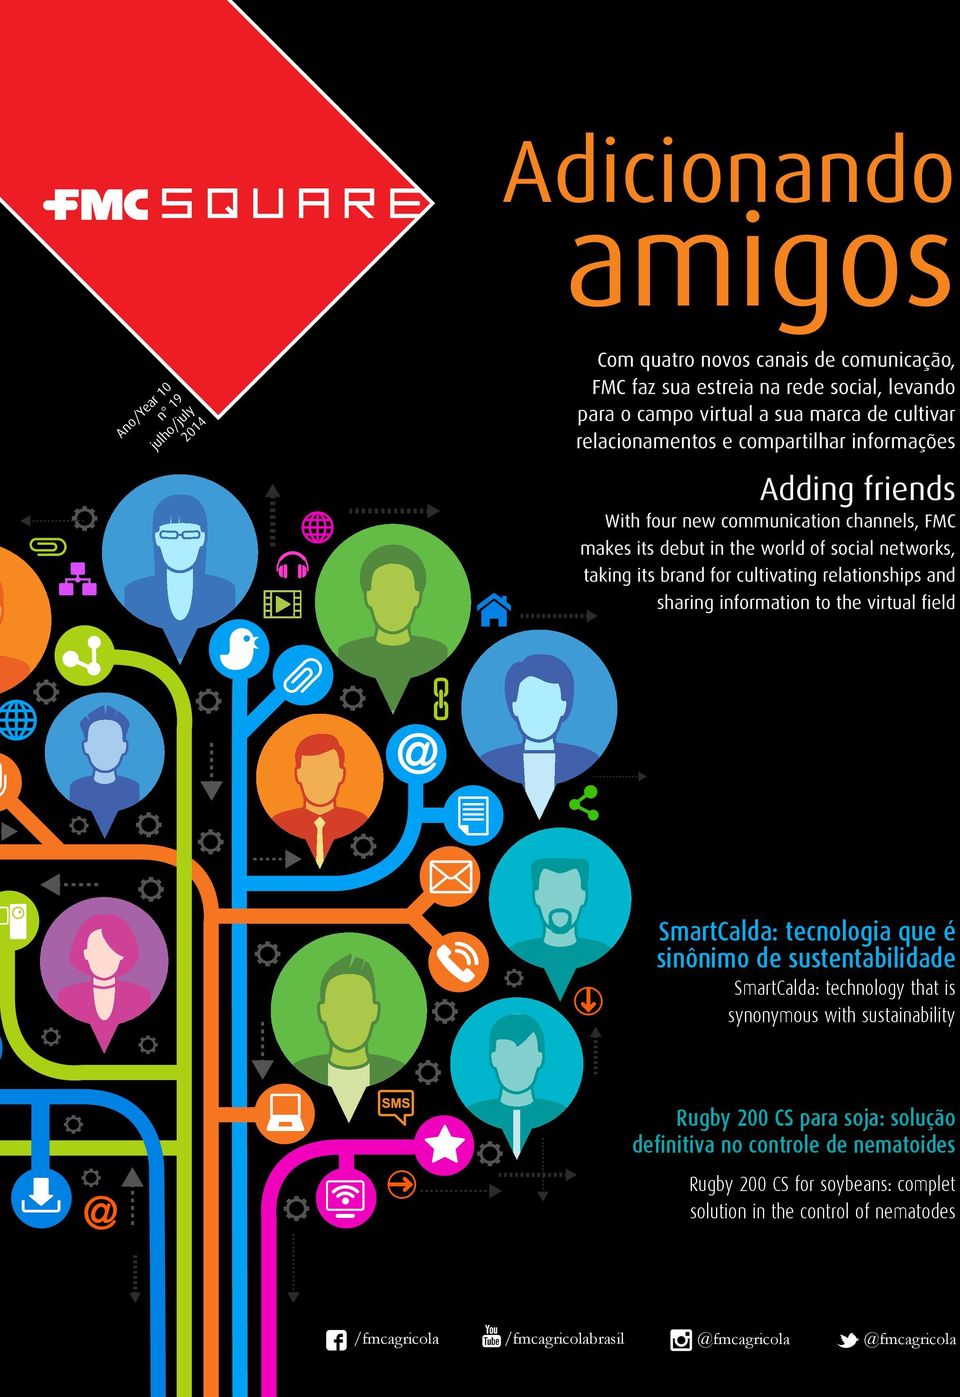 relationships and sharing information to the virtual field SmartCalda: tecnologia que é sinônimo de sustentabilidade SmartCalda: technology that is synonymous with sustainability Rugby